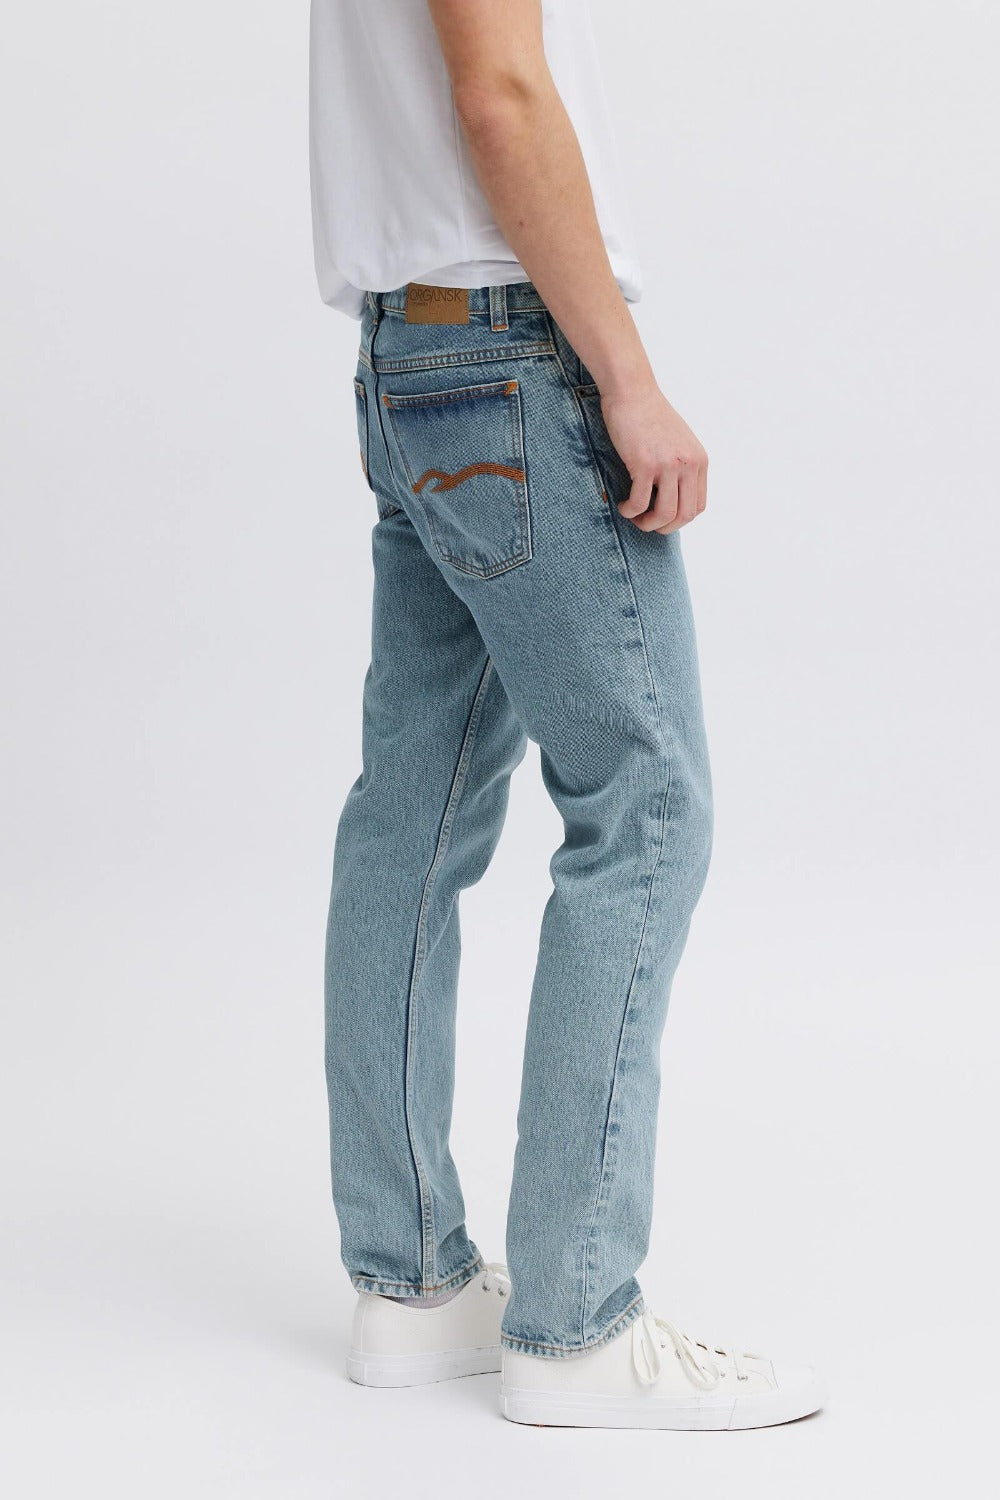 organic denim jeans with vegan patches